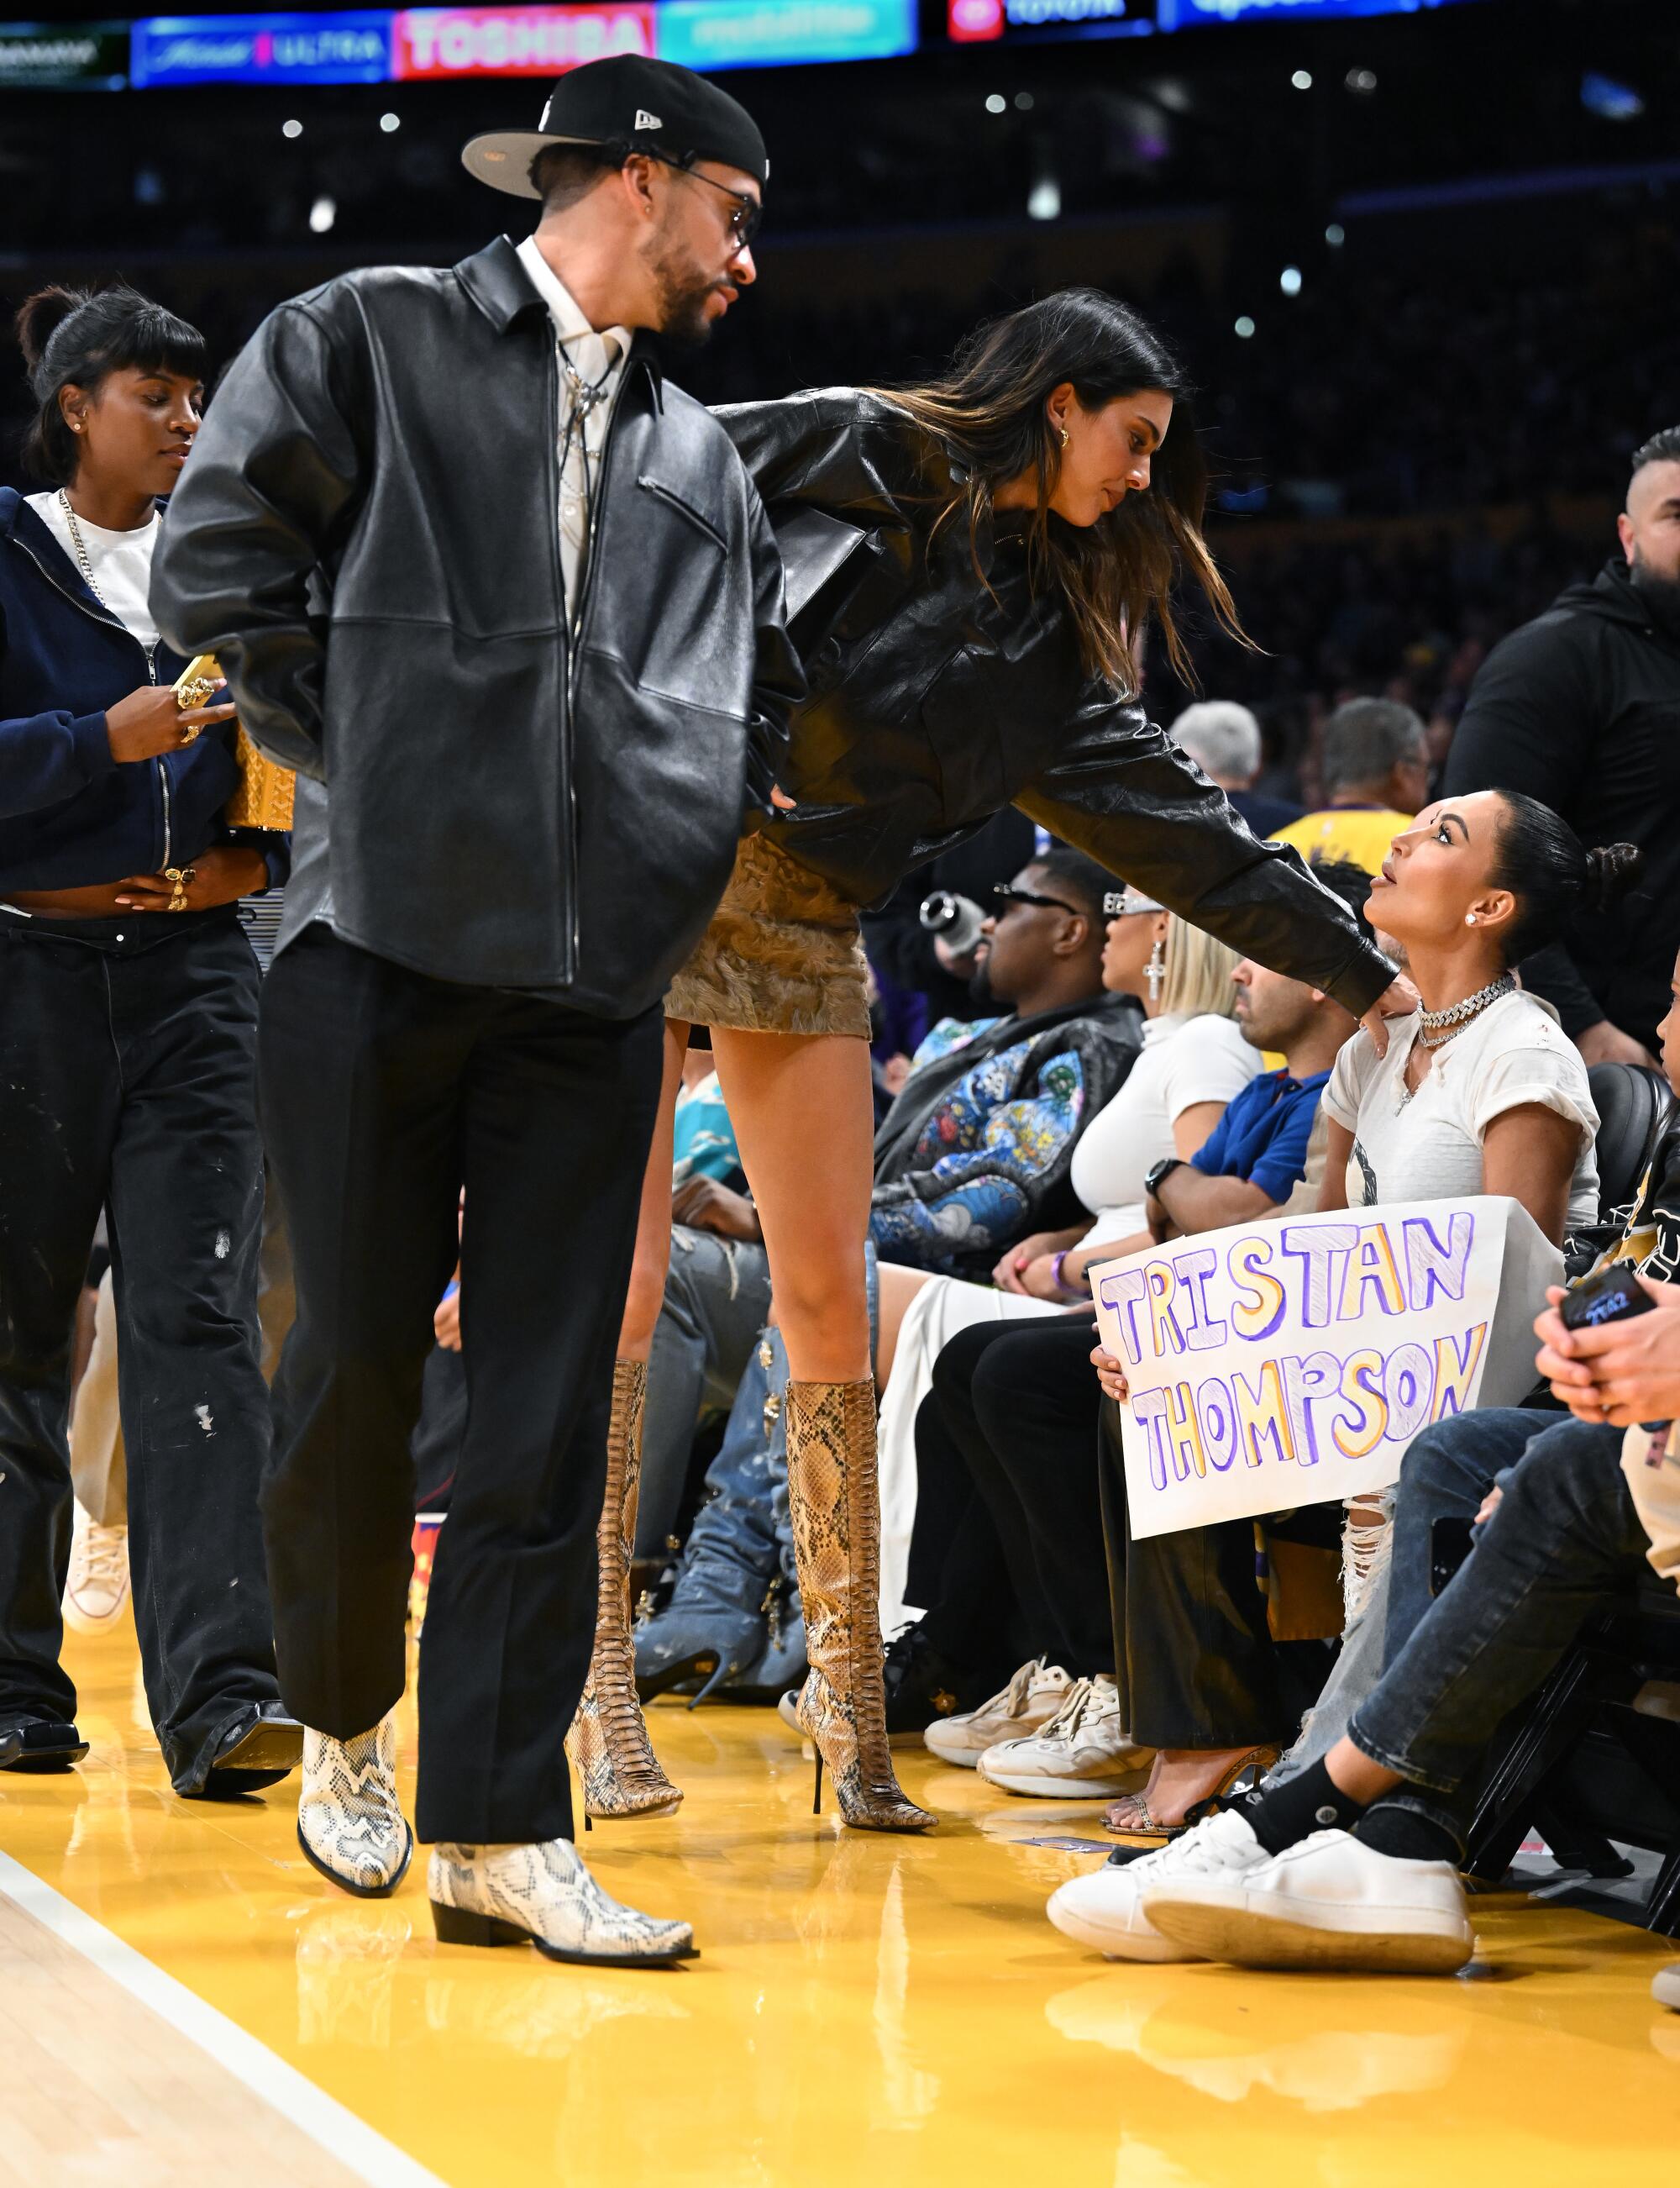 Kendall Jenner and Bad Bunny Sit Courtside at Lakers Game